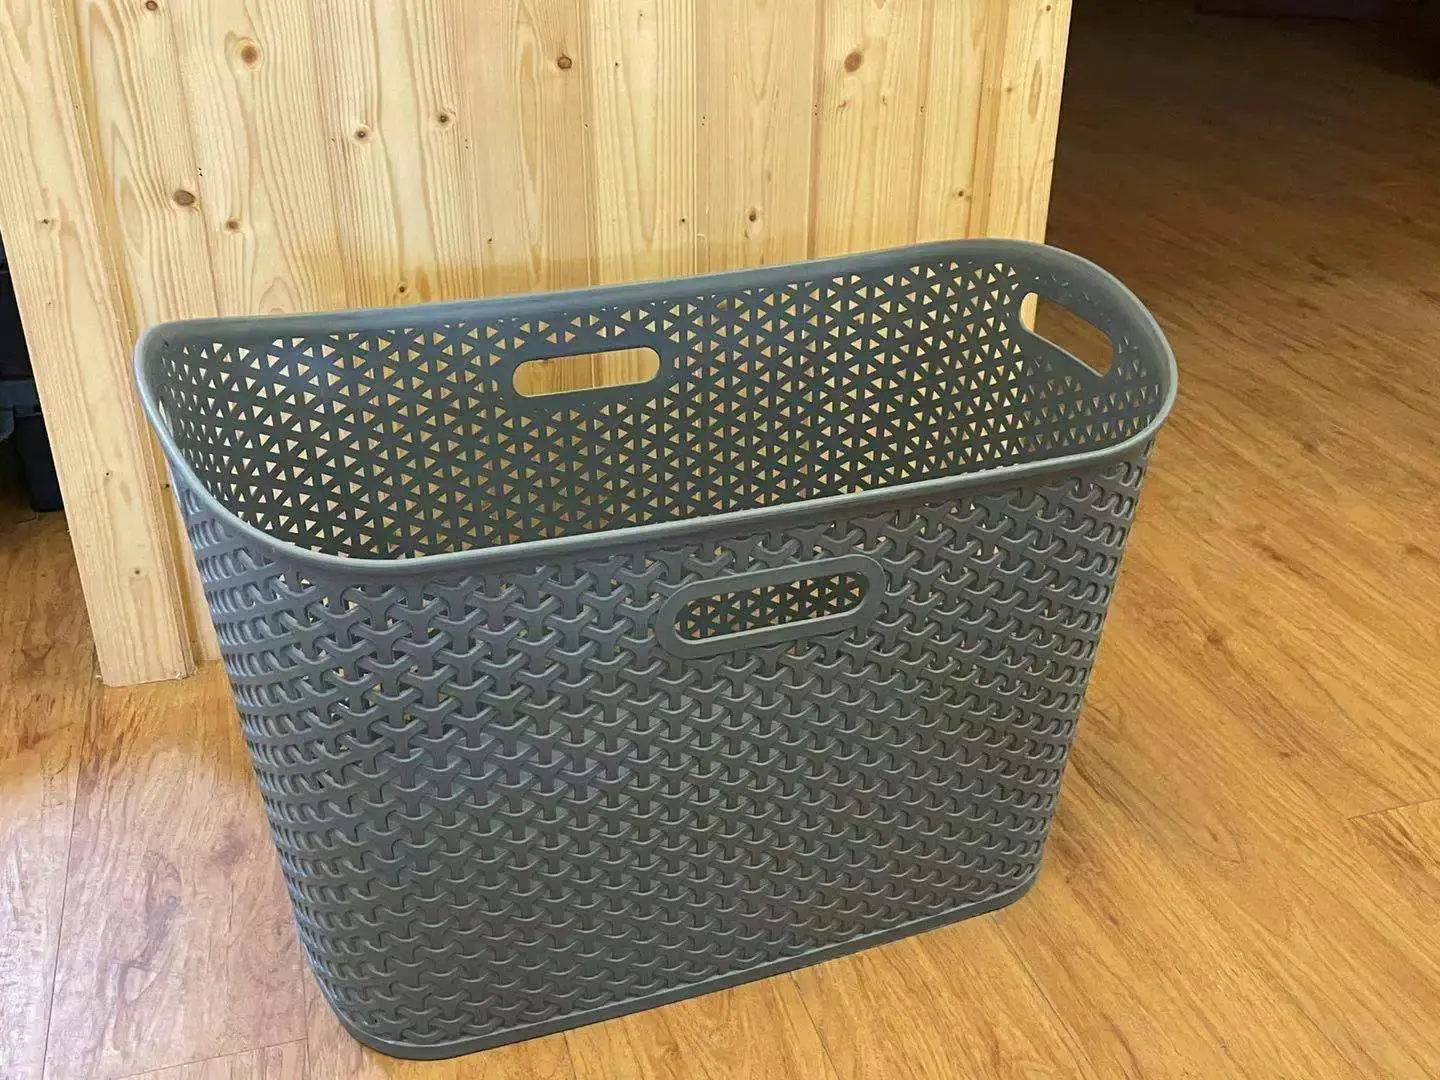 Frequently Asked Questions About Plastic Wicker Laundry Baskets